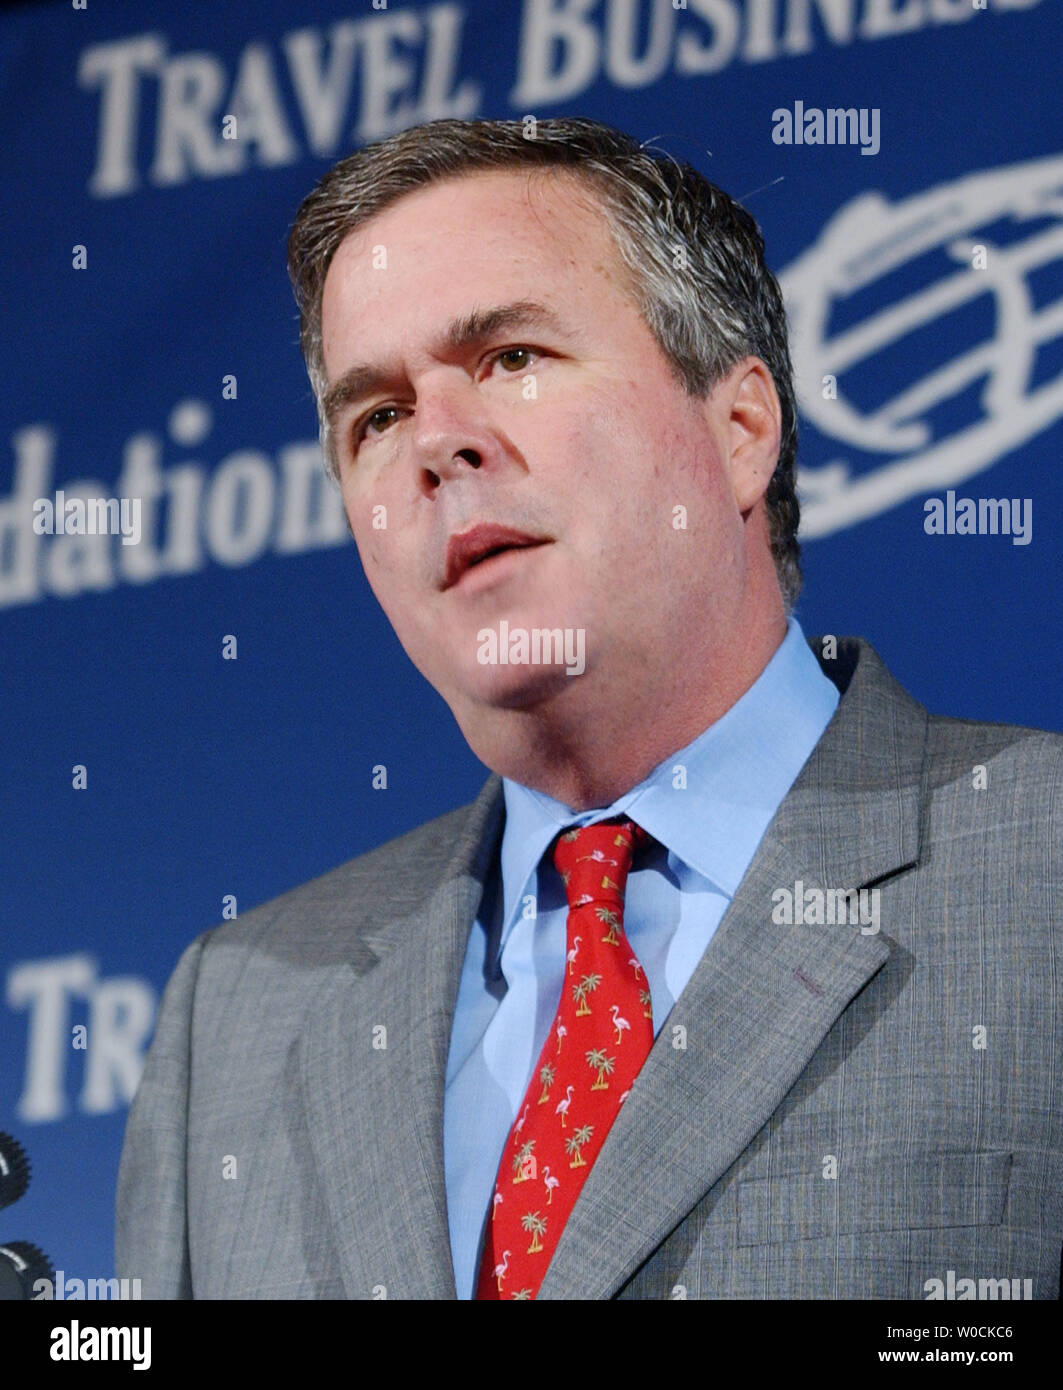 Florida Gov. Jeb Bush speaks to those gathered at the U.S. Chamber of Commerce for its 3rd Annual Travel and Tourism Summit, 'Redefining America at Home and Abroad' on April 20, 2005 in Washington.  Bush discussed how his state was able to rebound from 9/11 through its tourism industry and how important it is for balancing the state's budget.  (UPI Photo/Michael Kleinfeld) Stock Photo